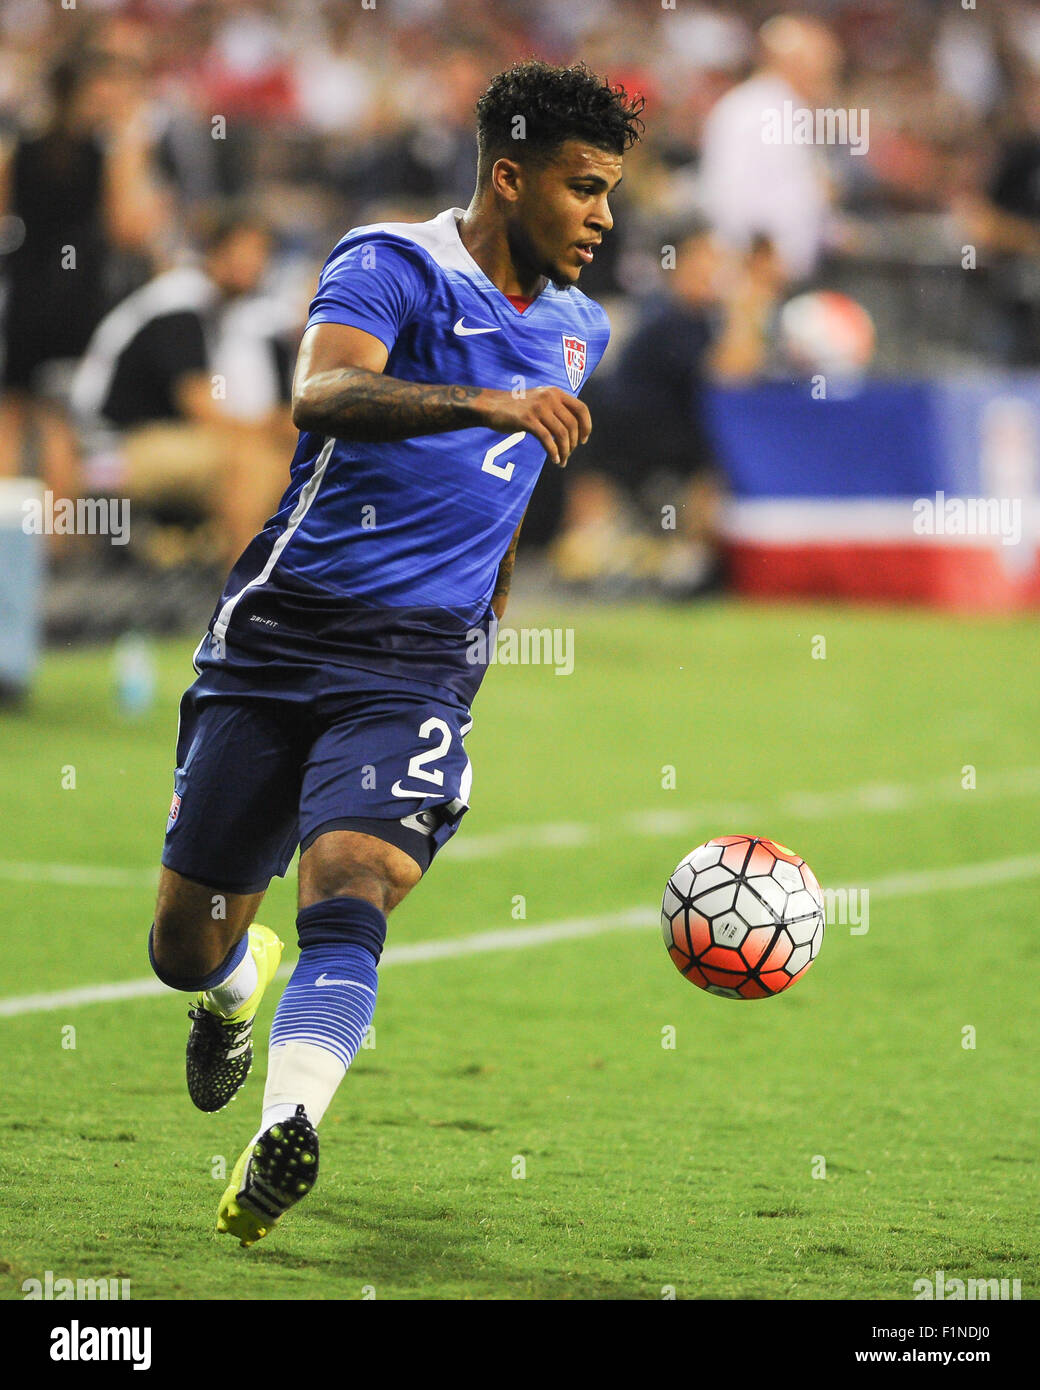 Washington, D.C, USA. 4th Sep, 2015. DEANDRE YEDLIN of the USA controls the ball during an international friendly between the United States and Peru at RFK Stadium in Washington, DC. Credit:  Kyle Gustafson/ZUMA Wire/Alamy Live News Stock Photo